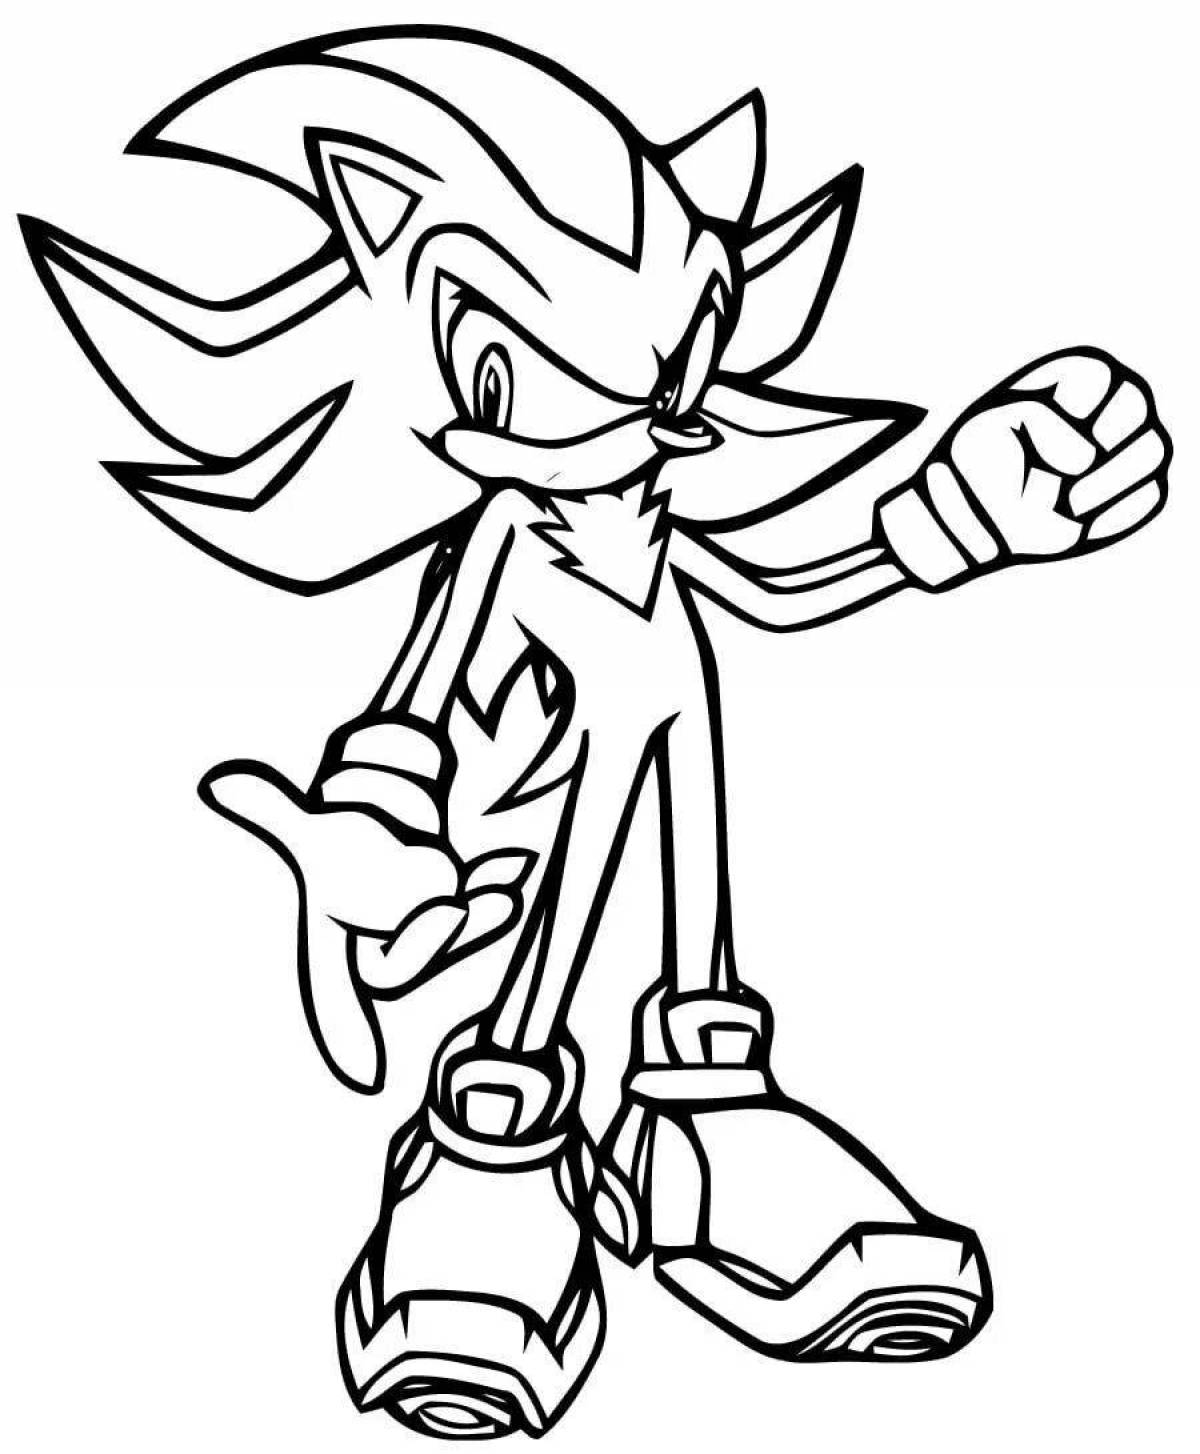 Glowing Christmas sonic coloring book